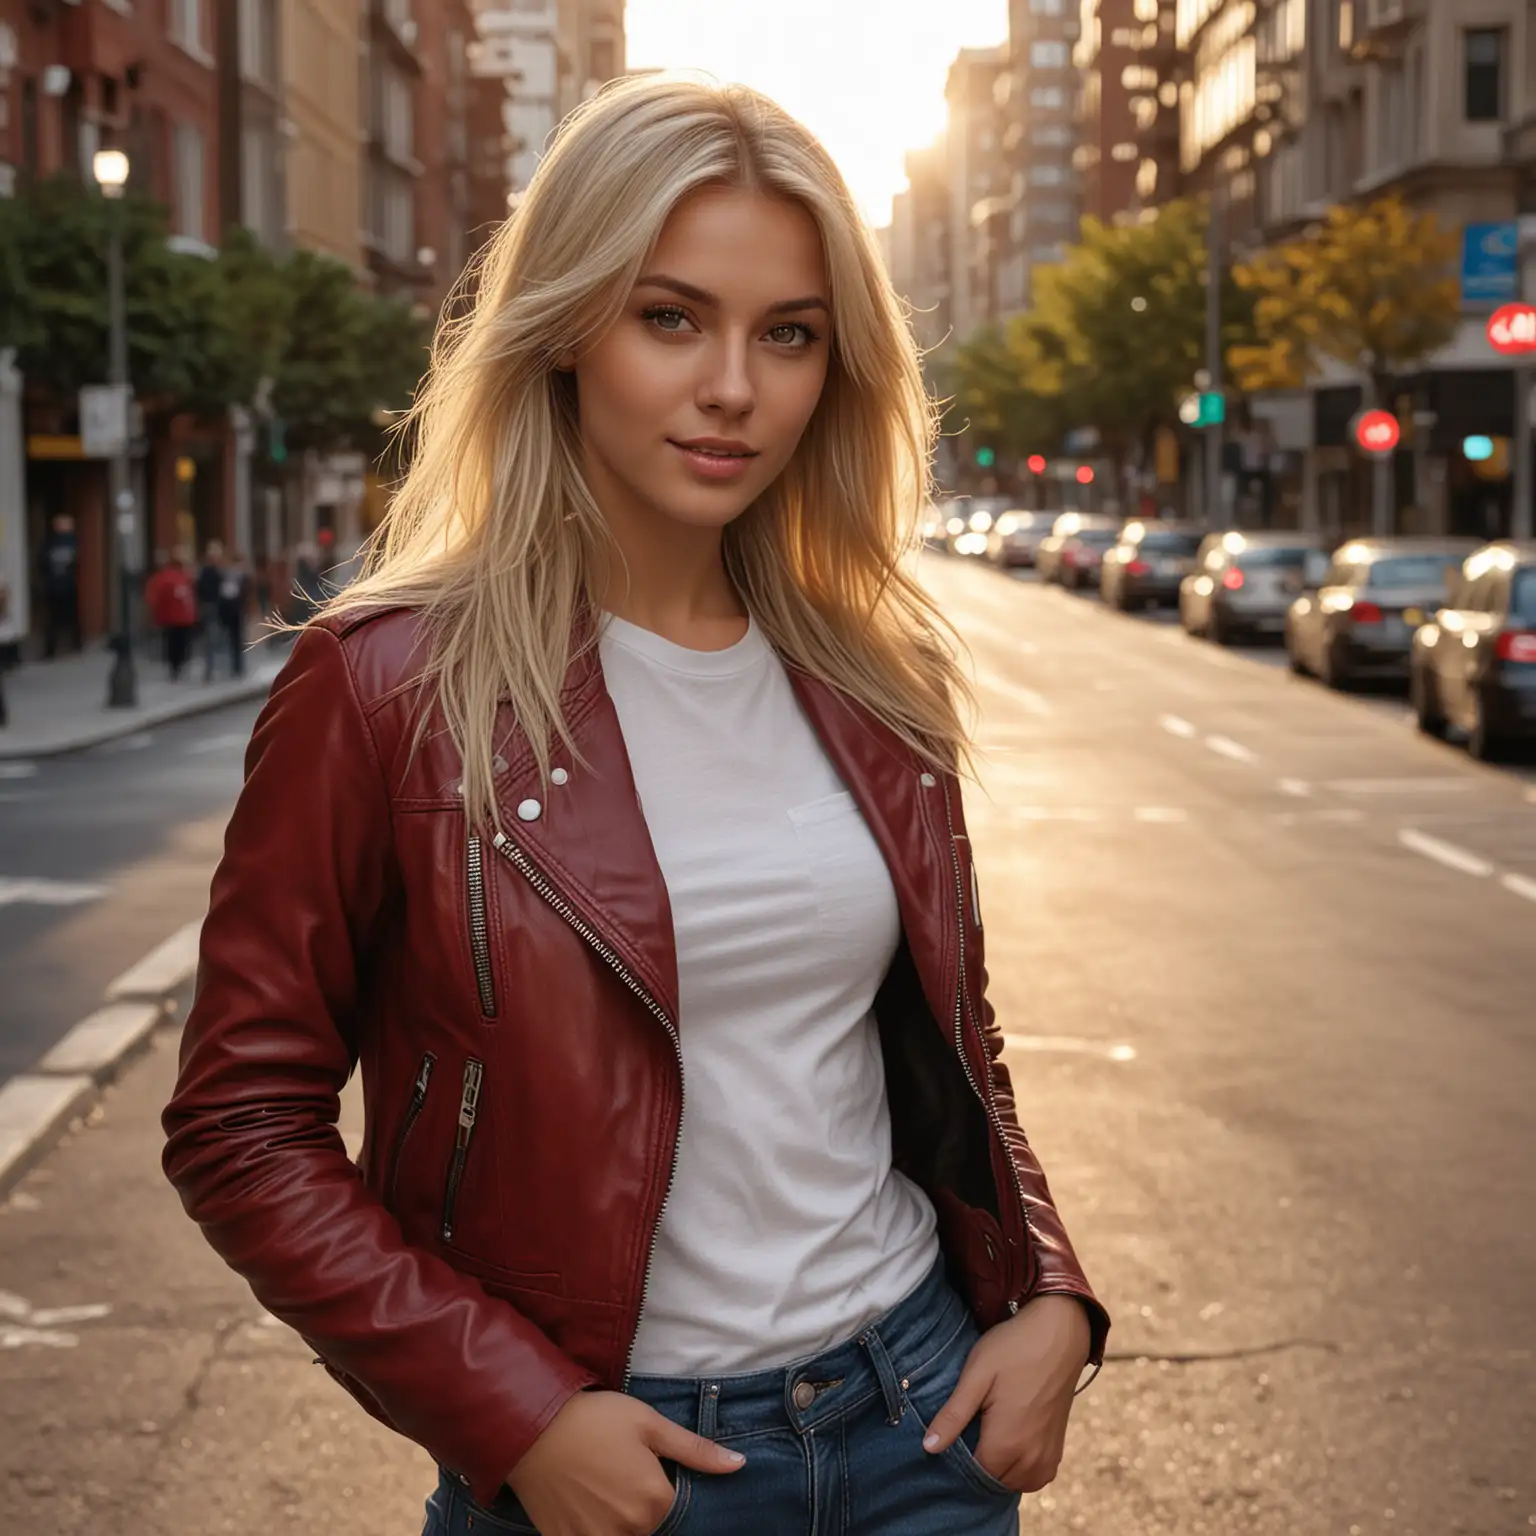 Blonde-Girl-in-Leather-Jacket-on-City-Street-at-Sunrise